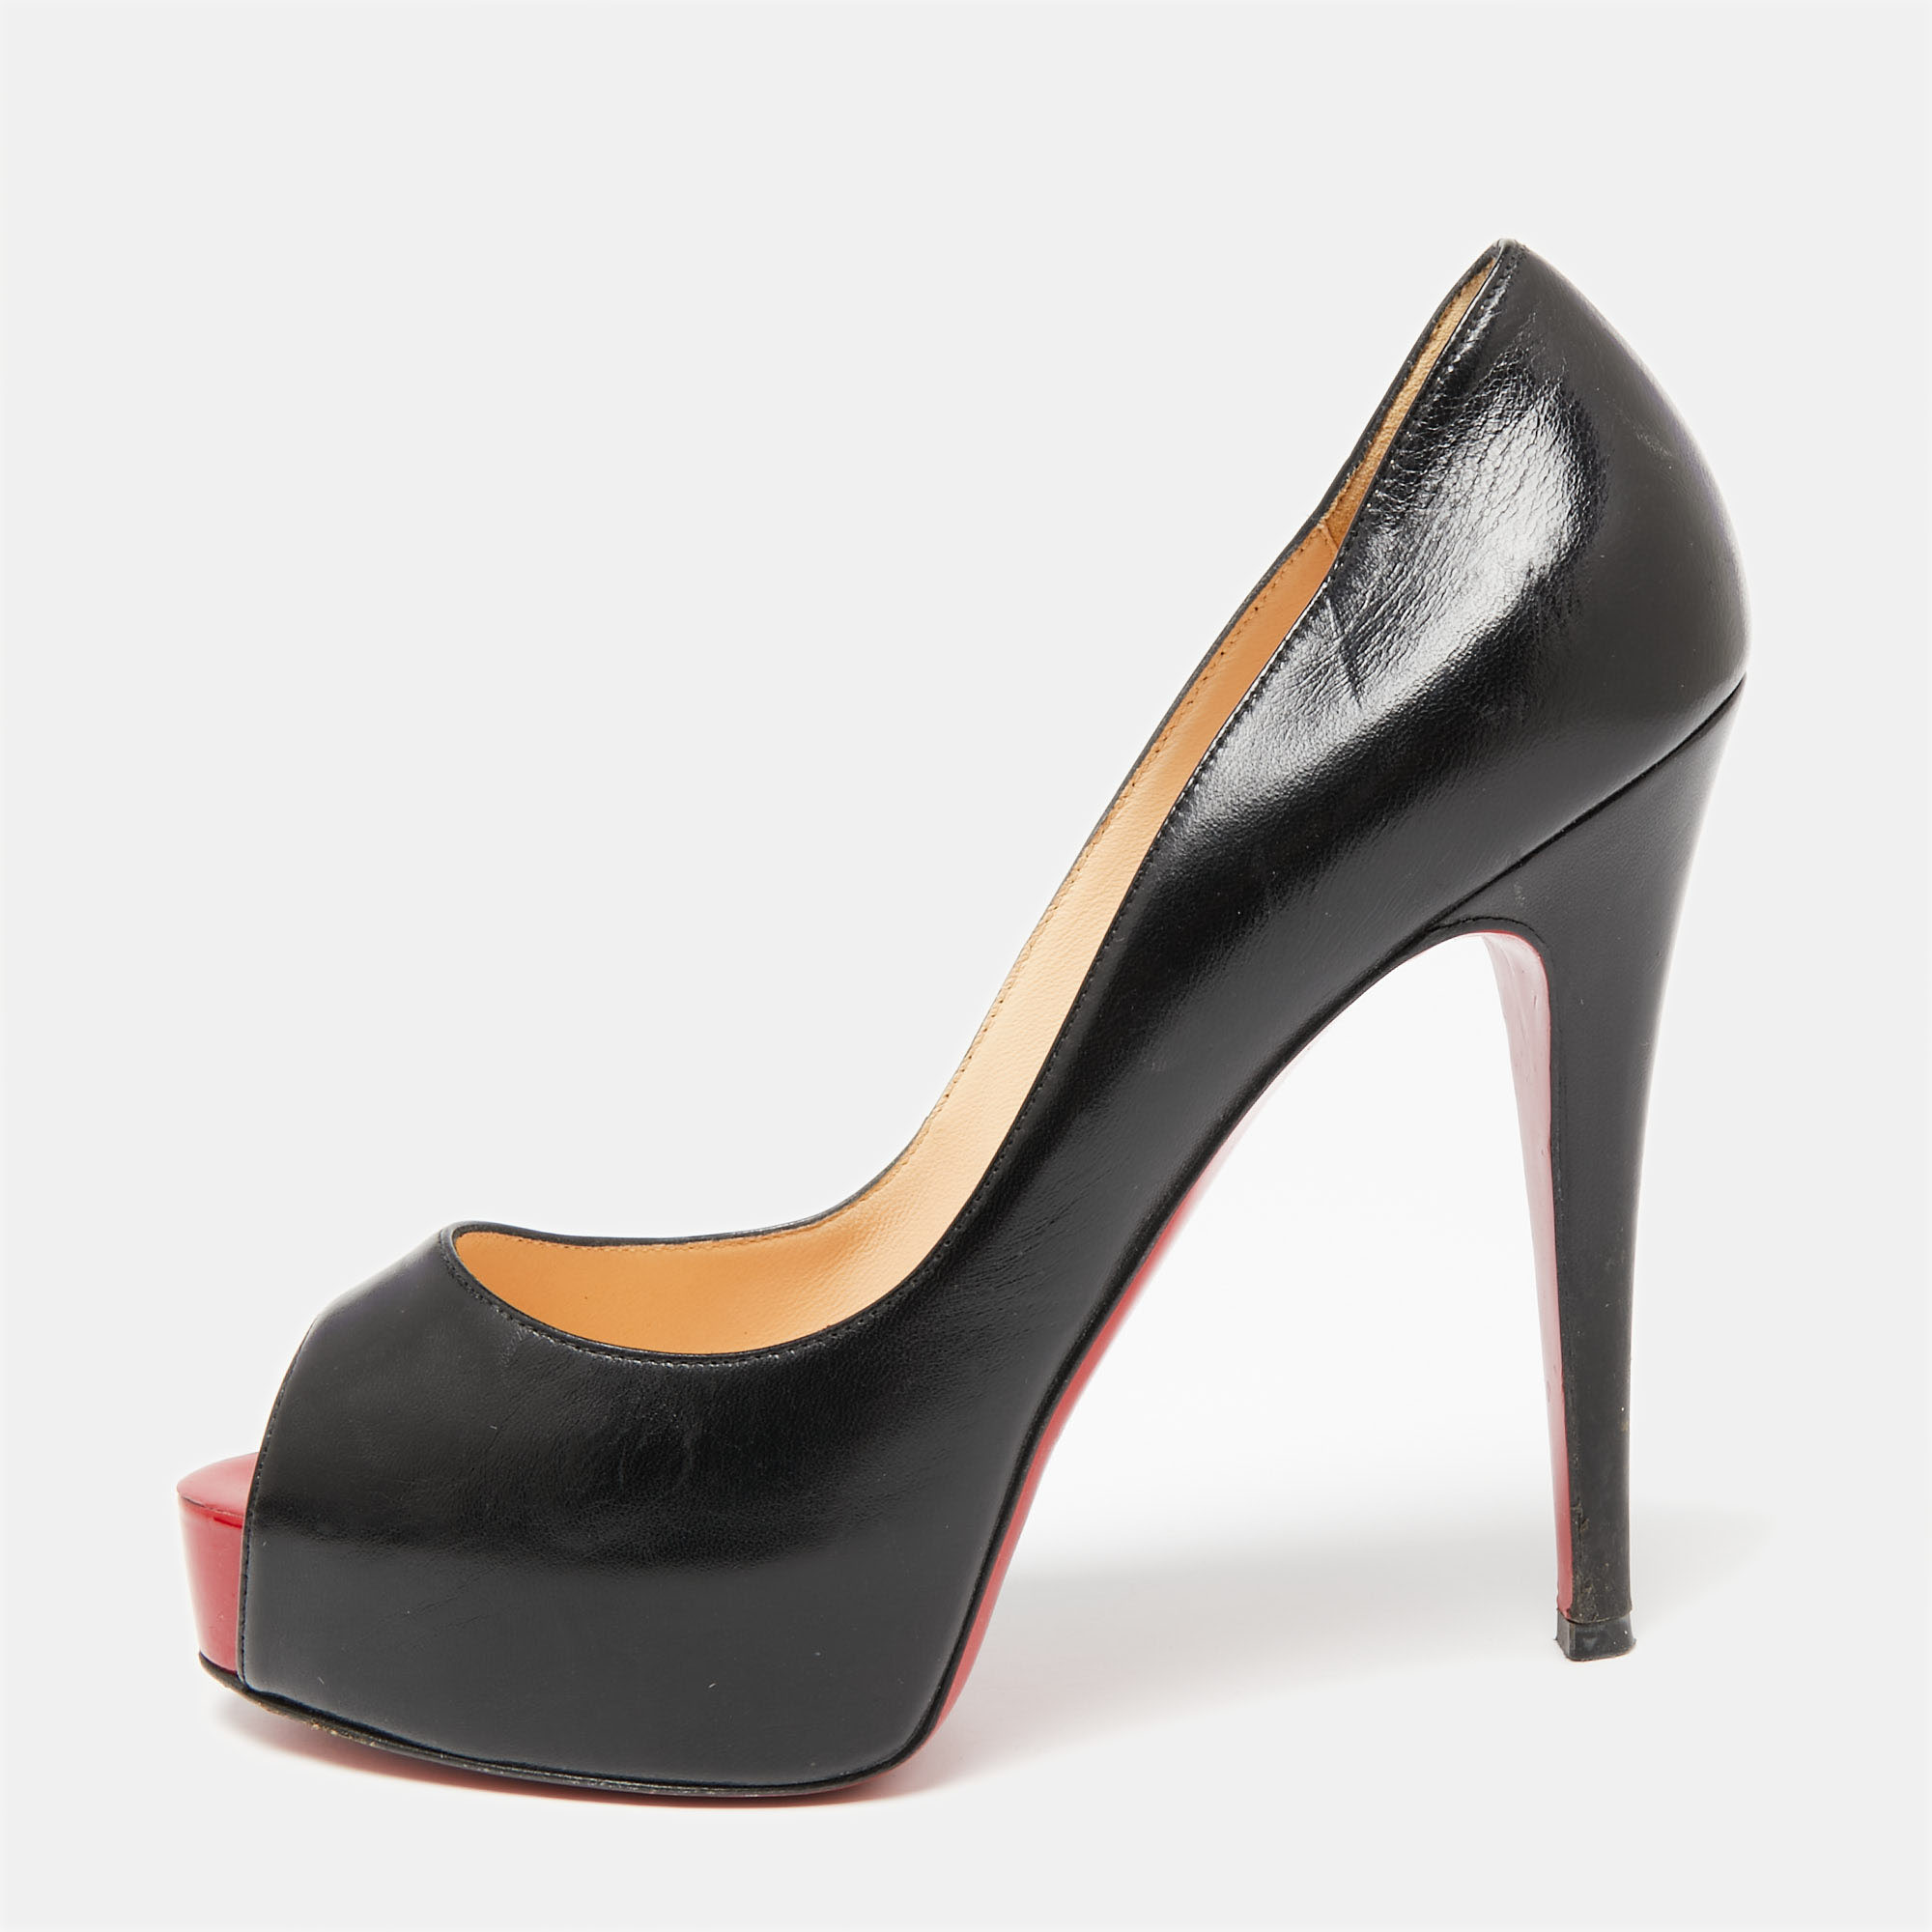 Pre-owned Christian Louboutin Black Leather Very Prive Peep-toe Pumps Size 37